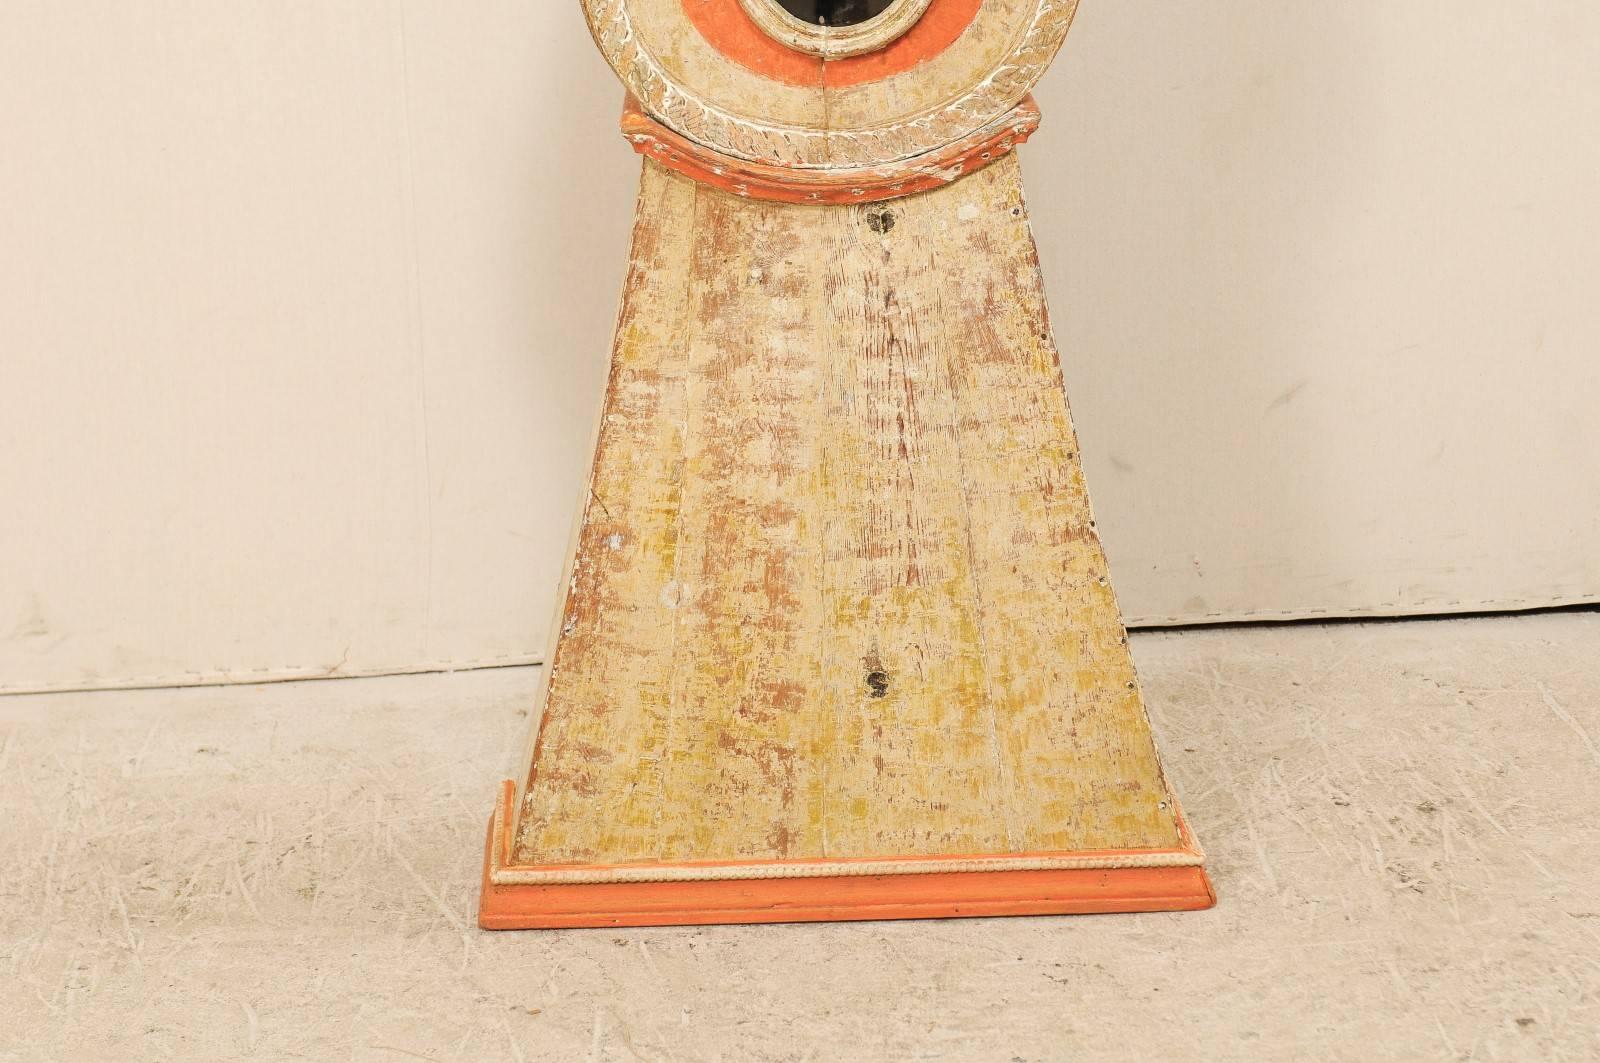 19th Century Painted Wood Swedish Clock with Warm Tangerine Accents 3